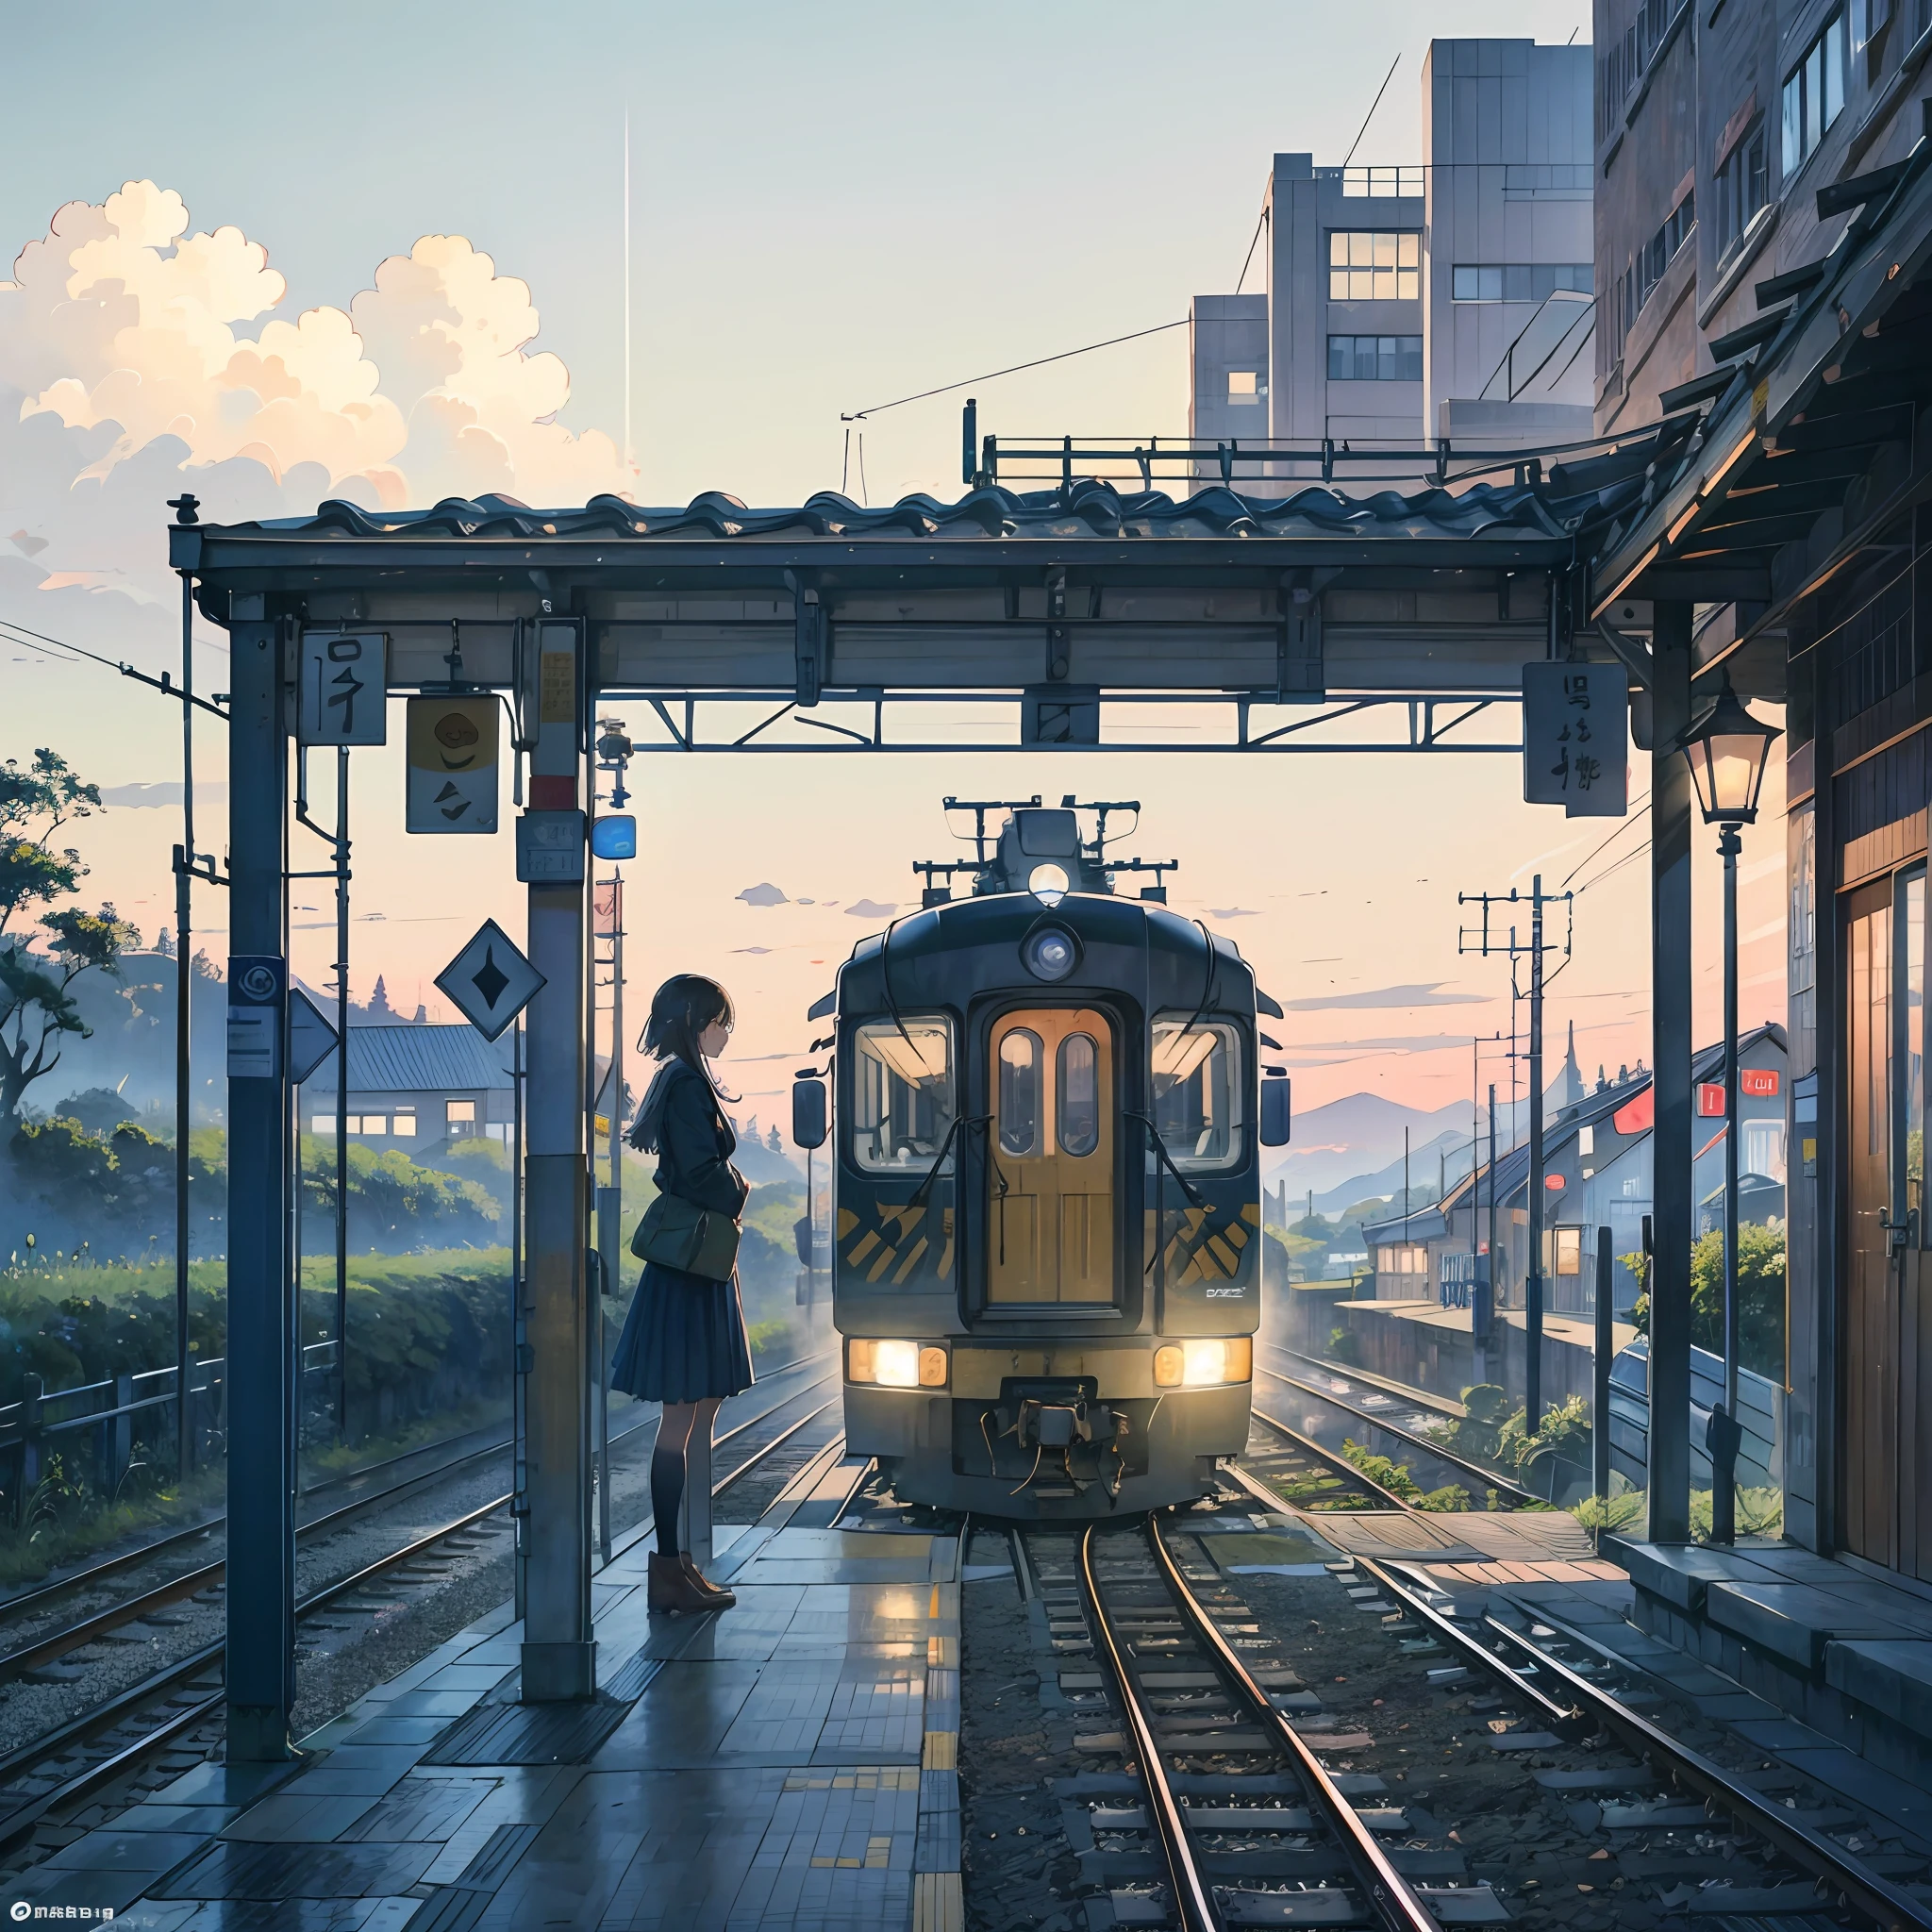 Train in the back right、A high school girl is waiting for a train on the platform of a station without a roof in the foreground on the right.、 station building、train track、Countryside around --auto